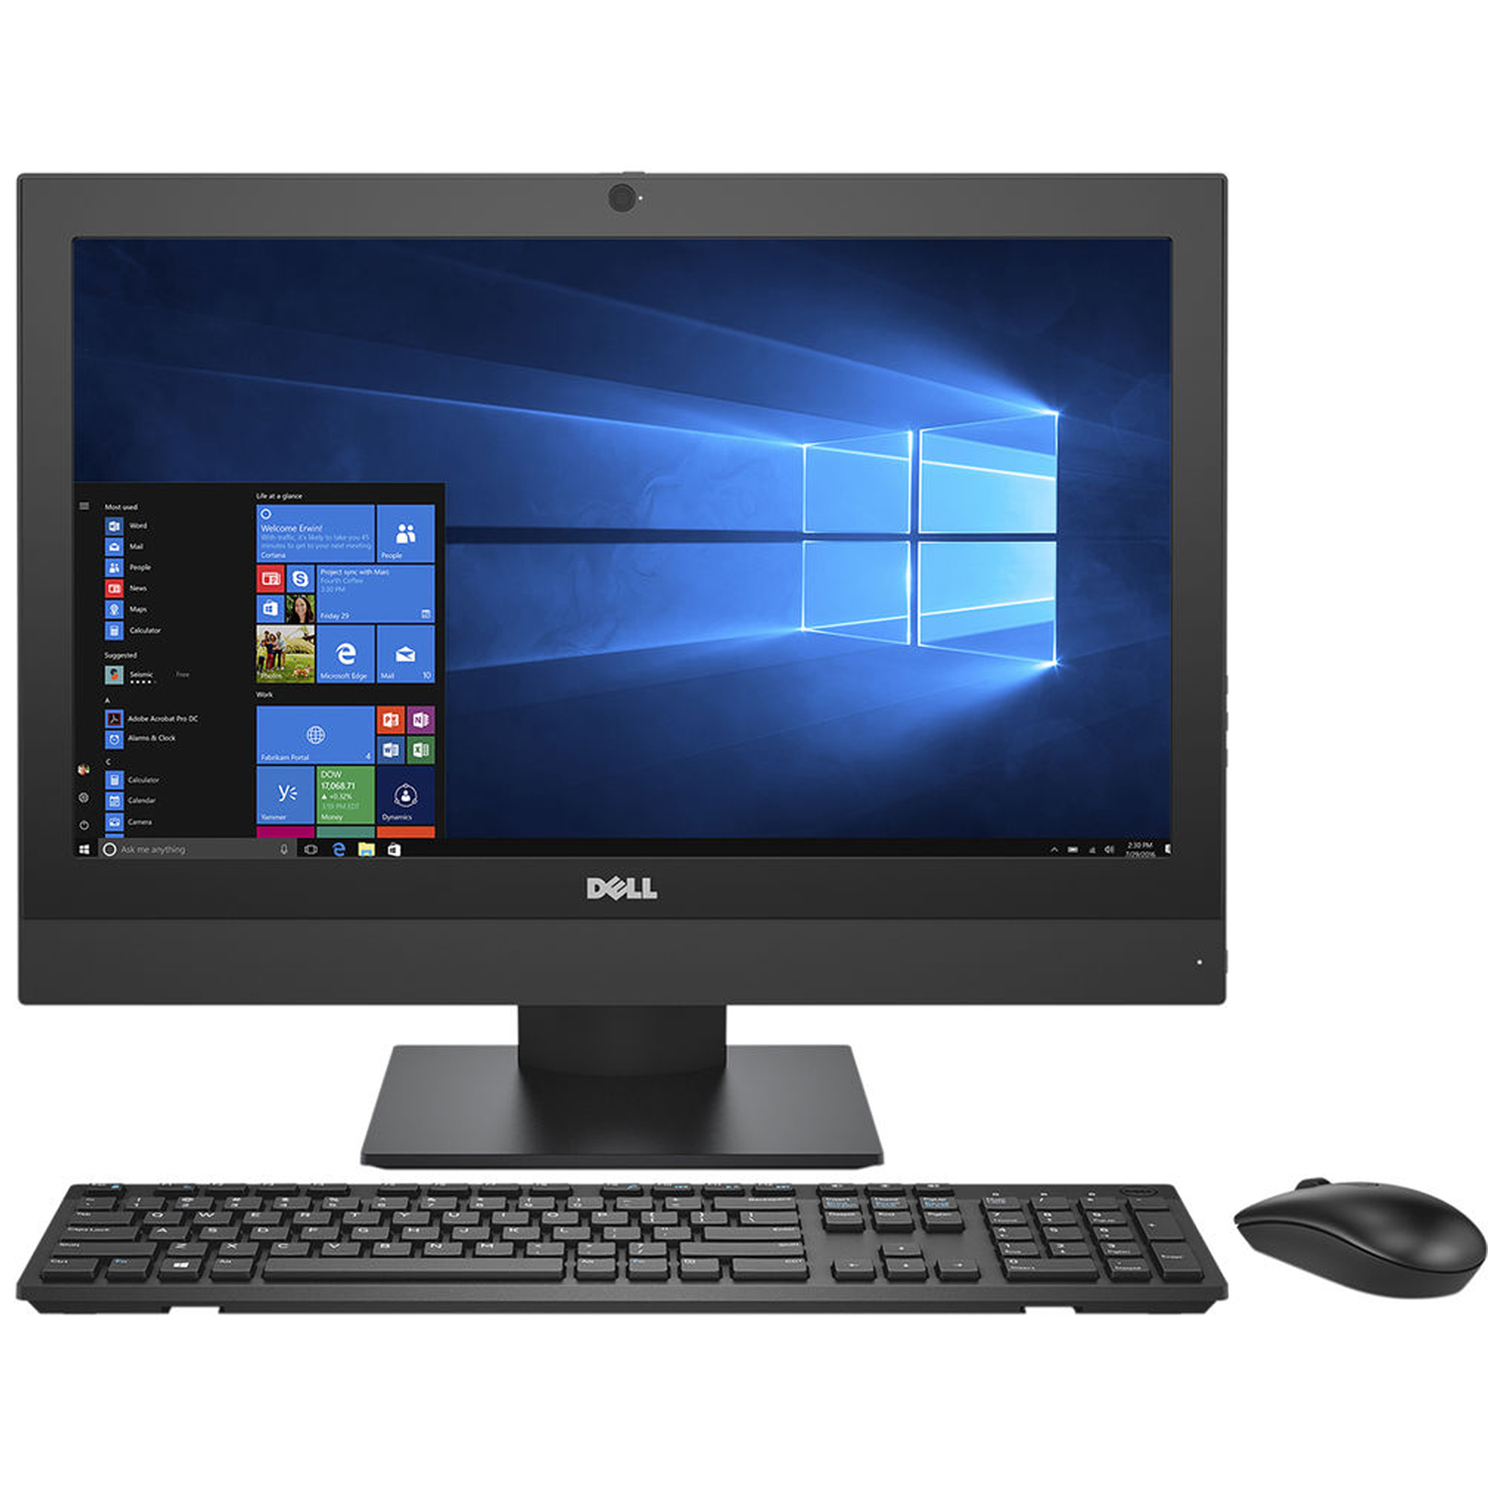 Dell Opt 5250 All In One Computer 21.5" HD Display, Intel Core i5-7500 7th Gen Processor, 16GB Memory, 256GB SSD, Windows 10 Home, HDMI, Displayport, Black, 1 Year Warranty (Used, Like New) - image 1 of 6